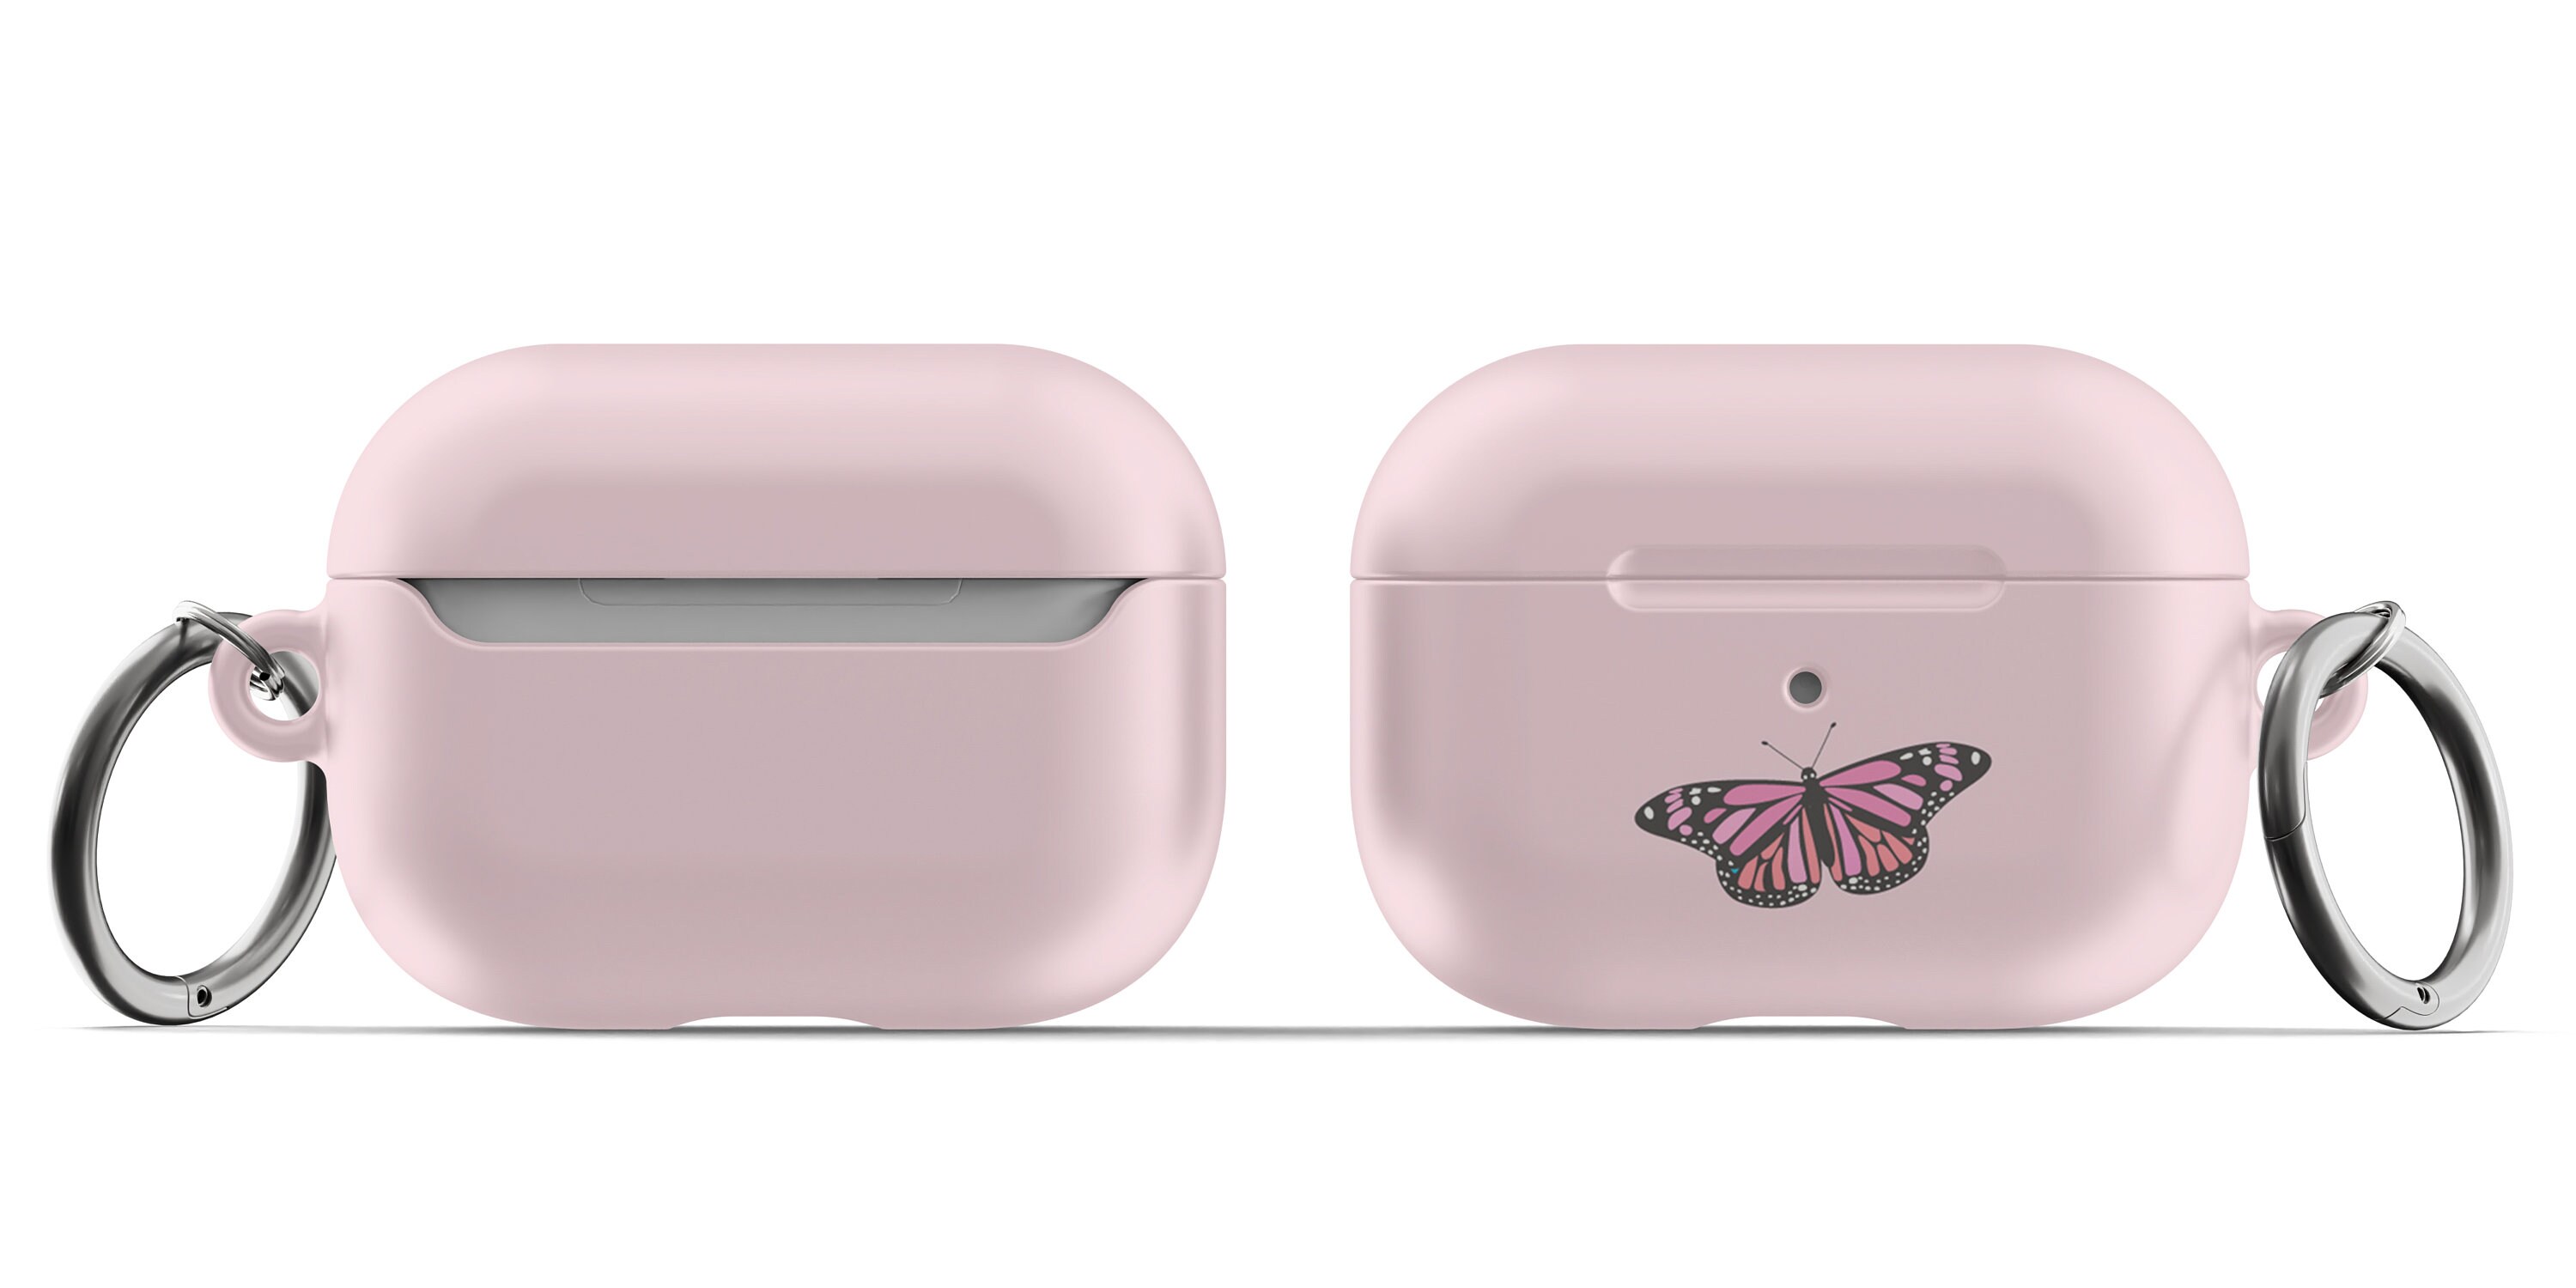 Butterflies at Burning Man - Custom AirPods case – Art by Isabella